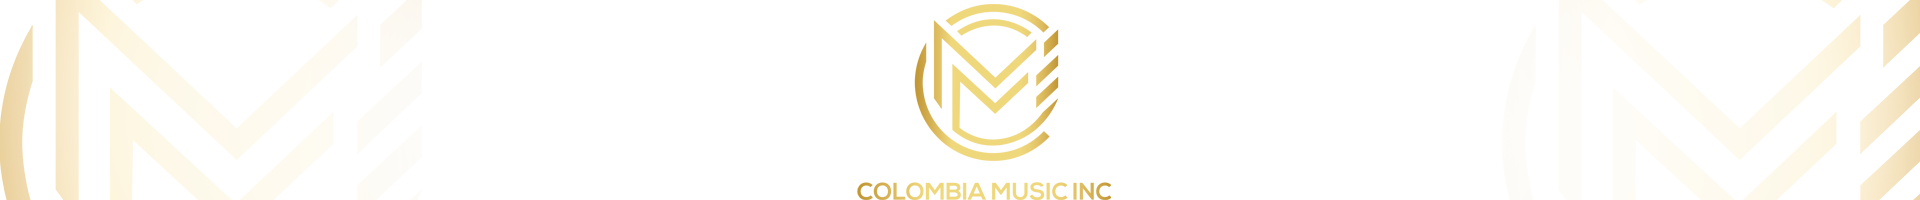 Colombia Music Inc